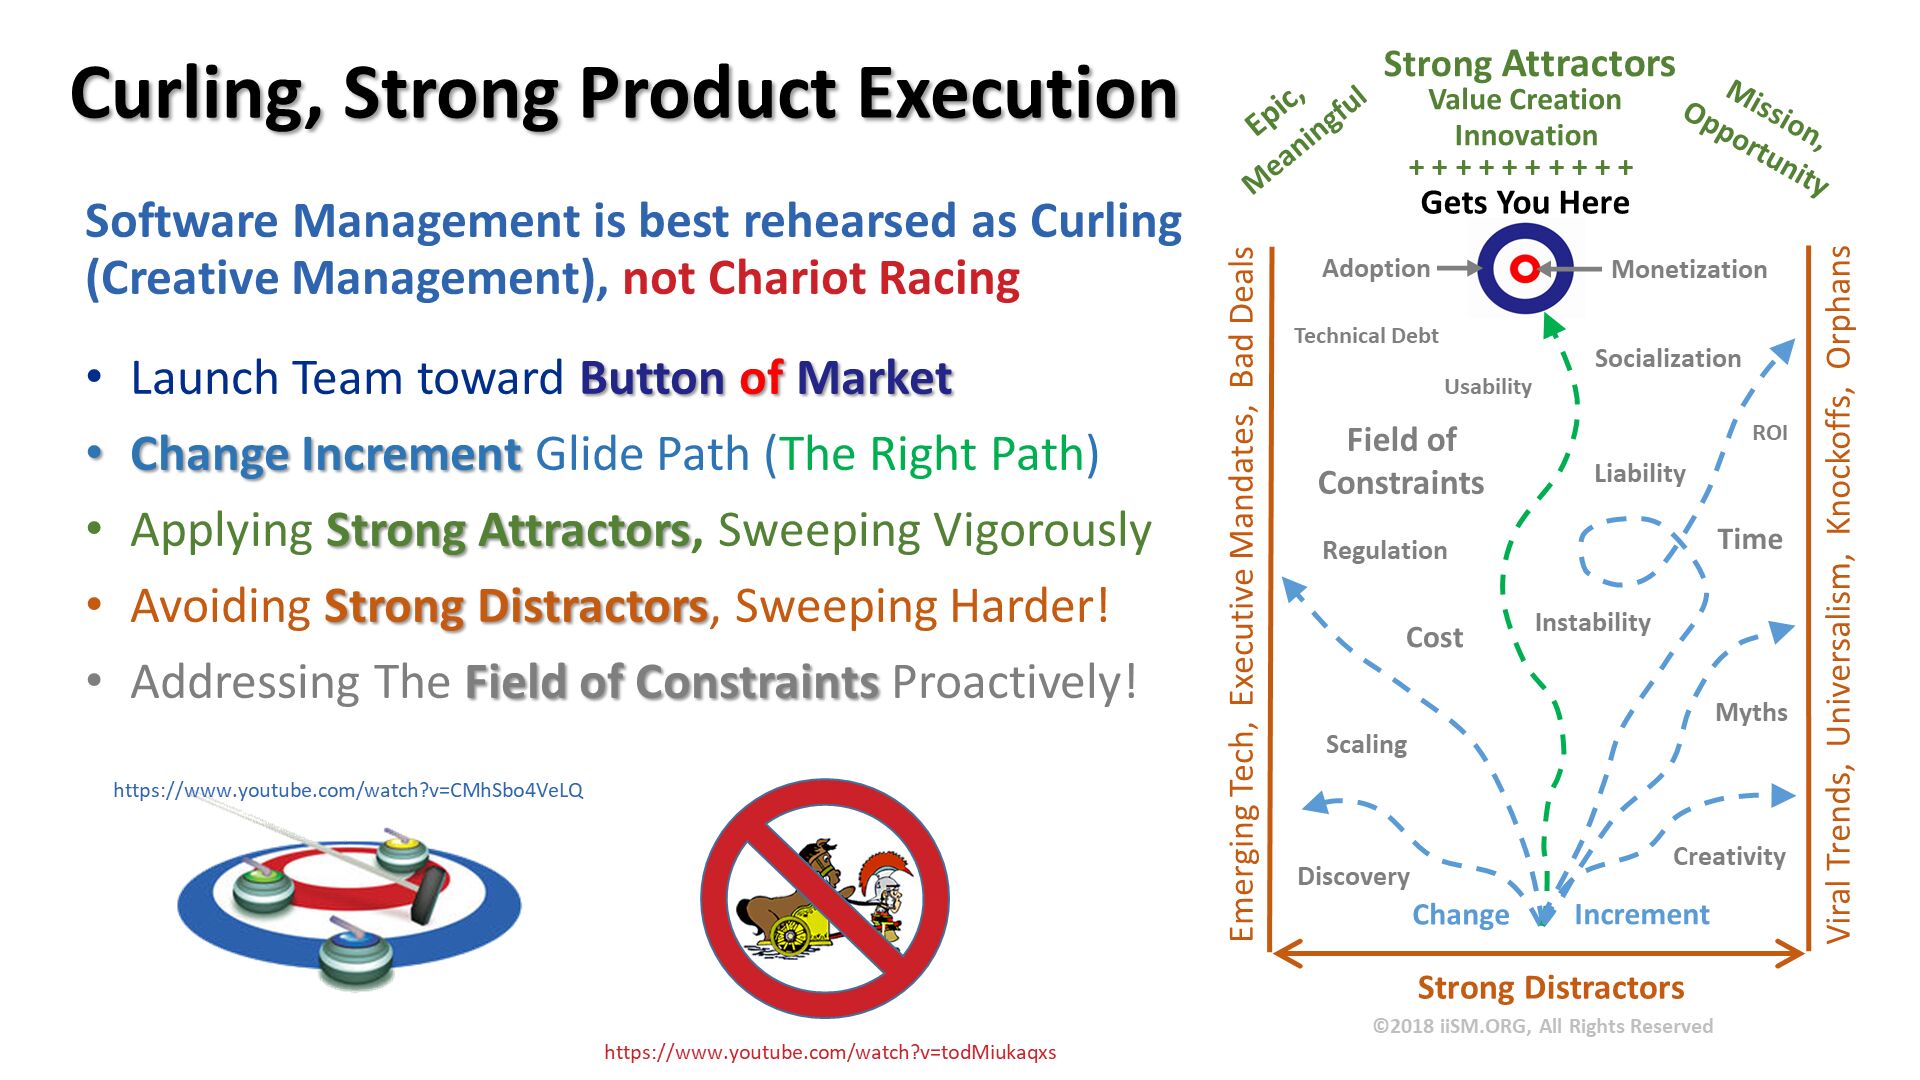 Curling, Strong Product Execution. Software Management is best rehearsed as Curling (Creative Management), not Chariot Racing
Launch Team toward Button of Market
Change Increment Glide Path (The Right Path)
Applying Strong Attractors, Sweeping Vigorously
Avoiding Strong Distractors, Sweeping Harder!
Addressing The Field of Constraints Proactively!. https://www.youtube.com/watch?v=CMhSbo4VeLQ. https://www.youtube.com/watch?v=todMiukaqxs. 